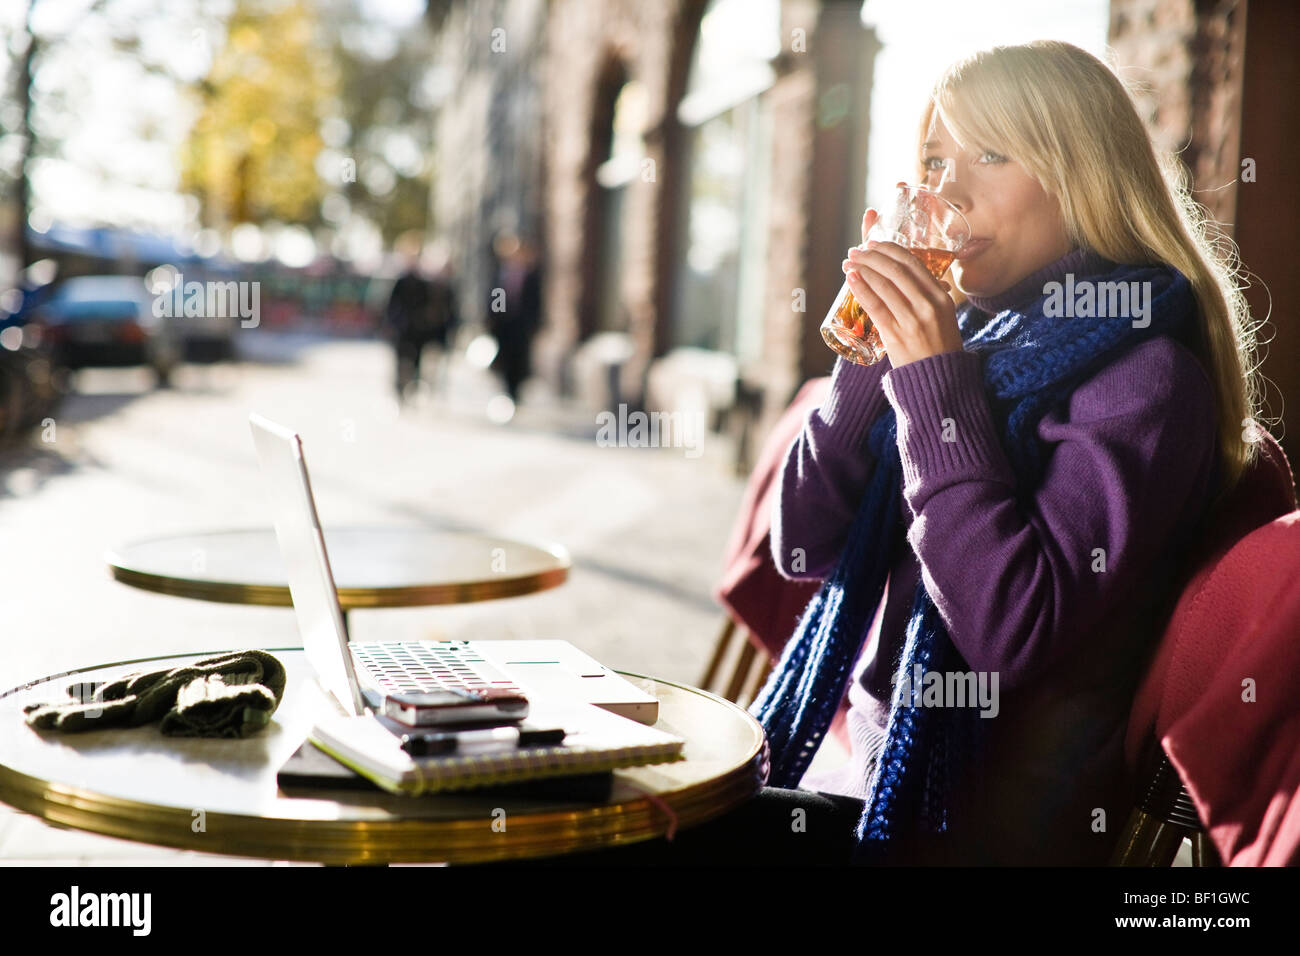 Young woman sitting in a cafe using a laptop, Sweden. Stock Photo